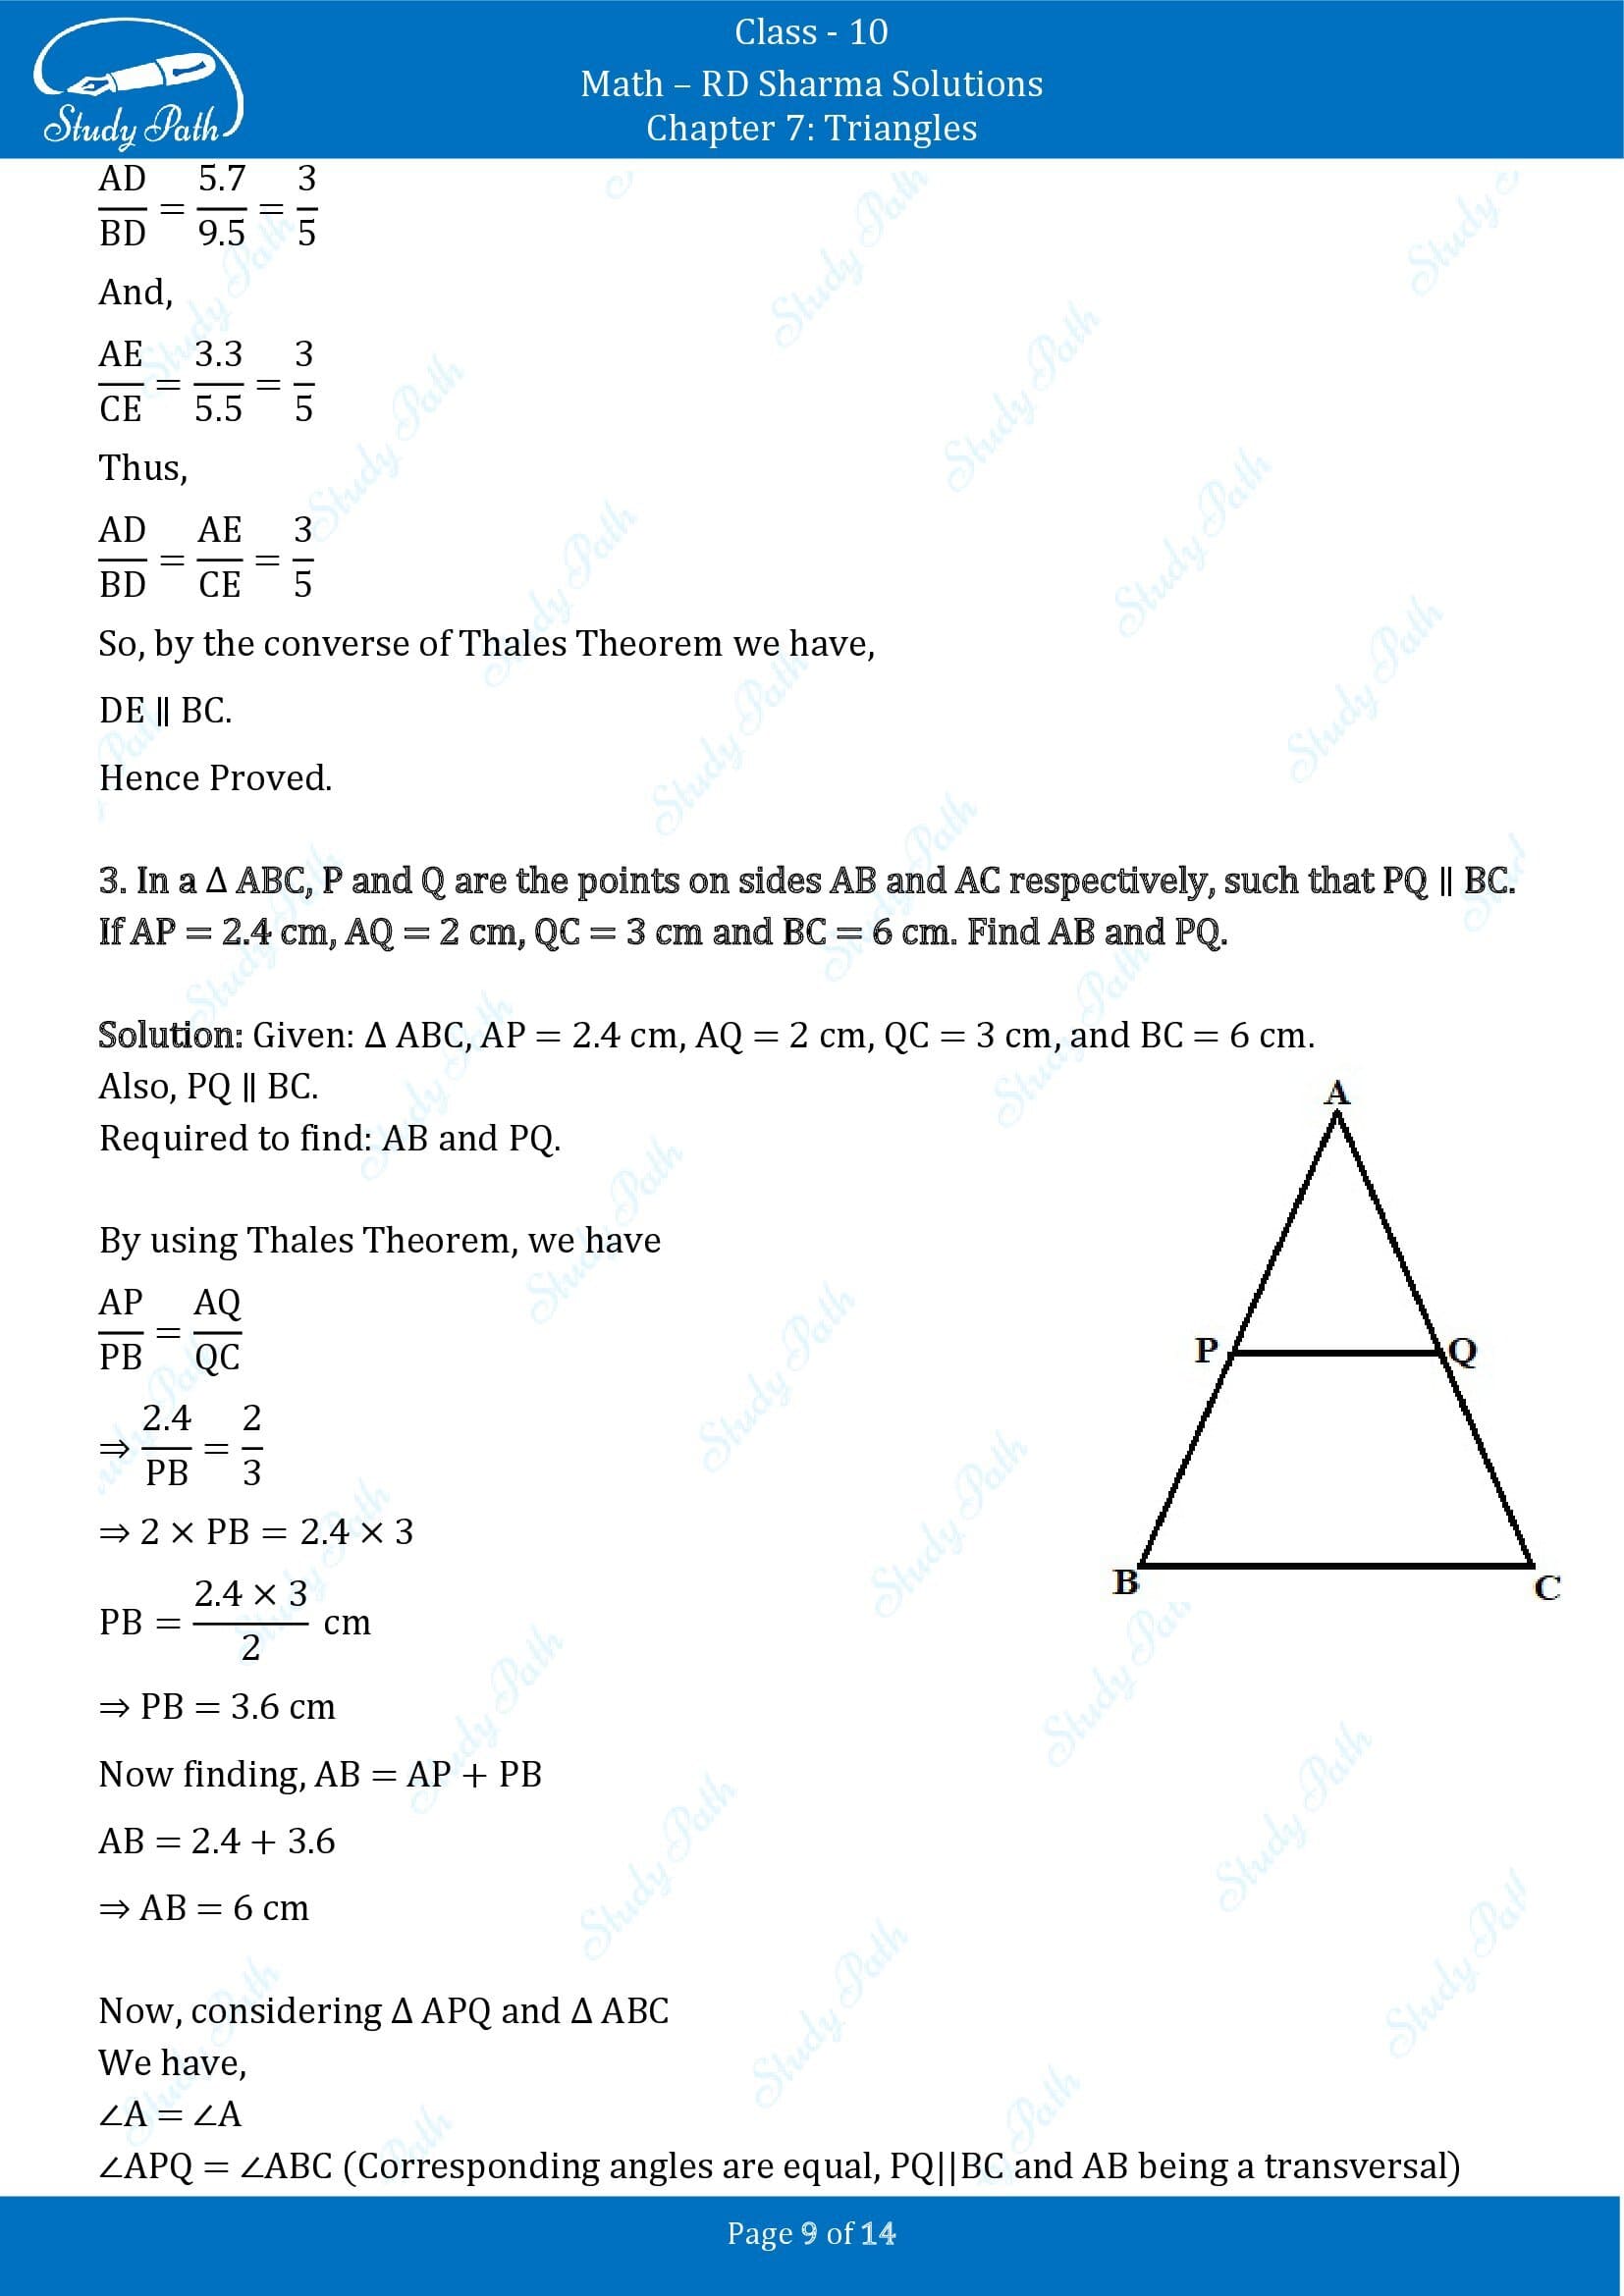 RD Sharma Solutions Class 10 Chapter 7 Triangles Exercise 7.2 00009